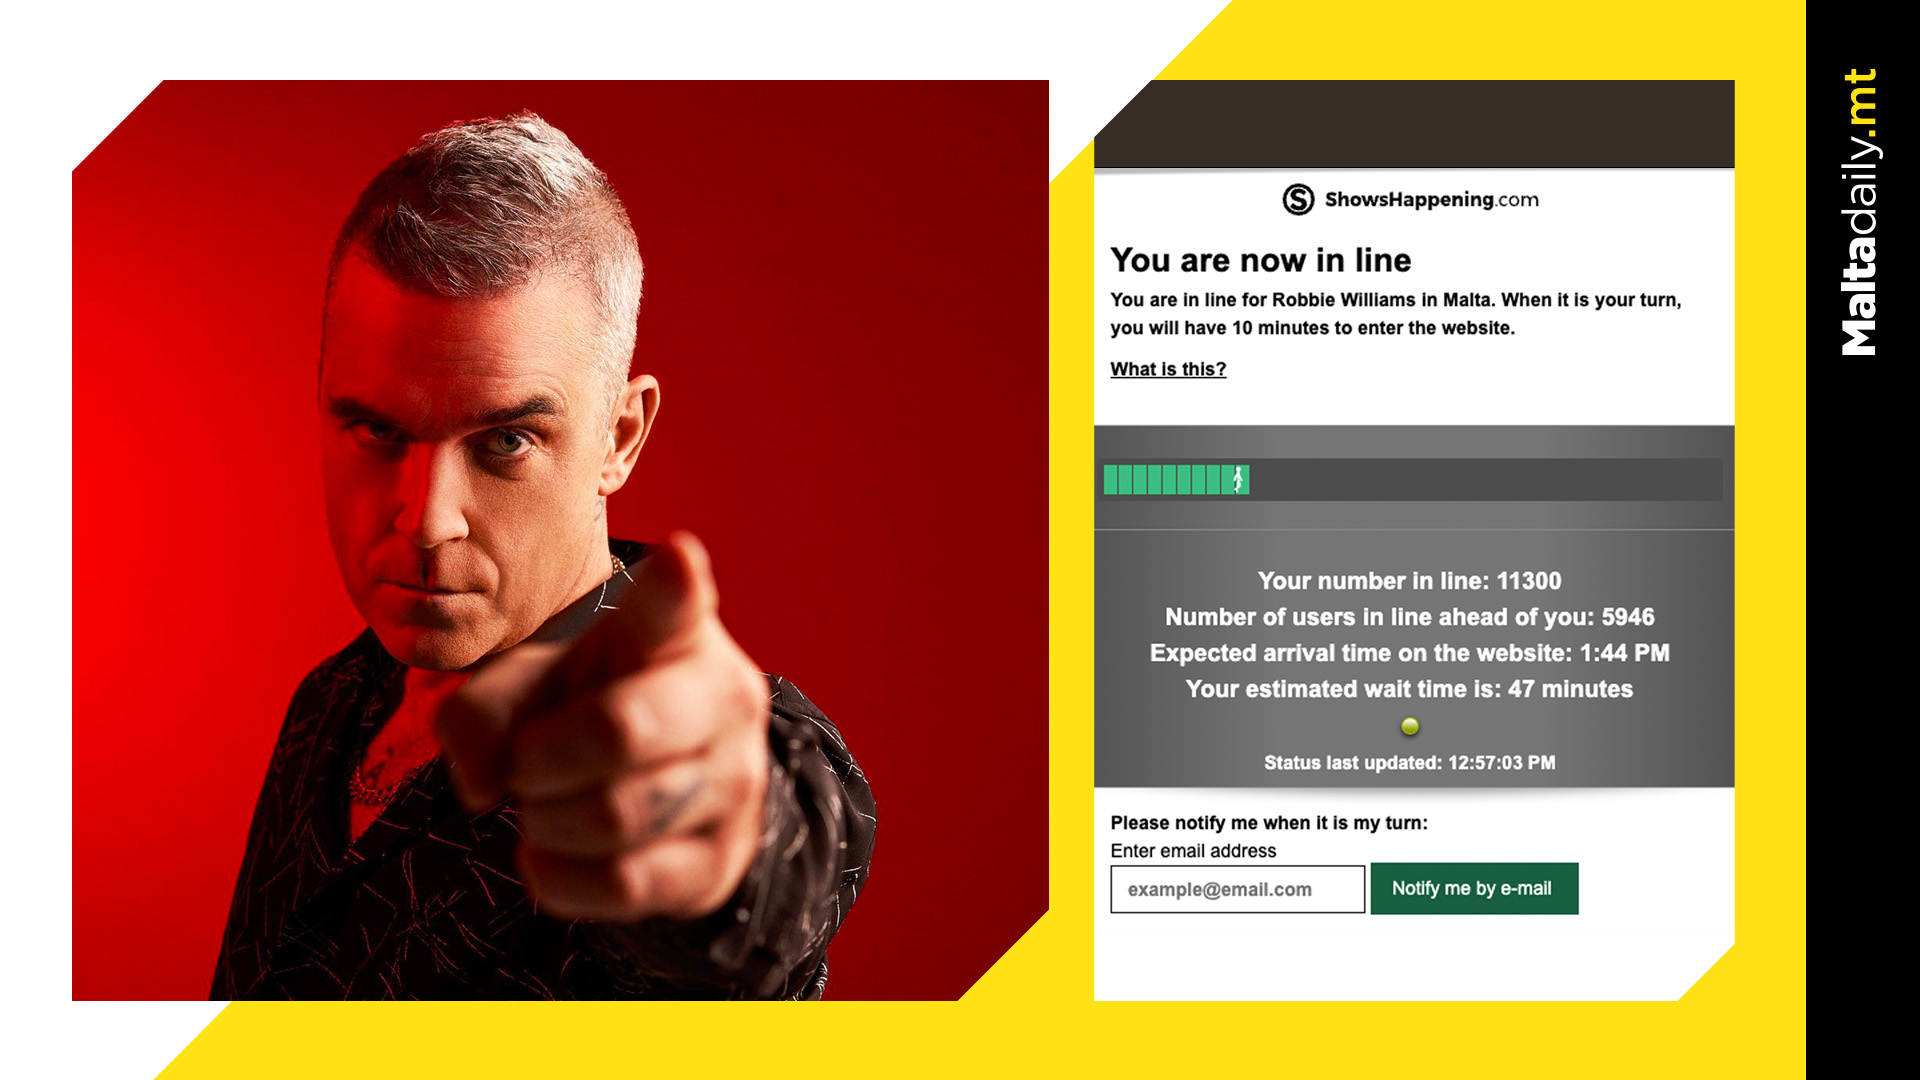 Waiting list for Robbie Williams tickets surpasses 10,000 in under one hour